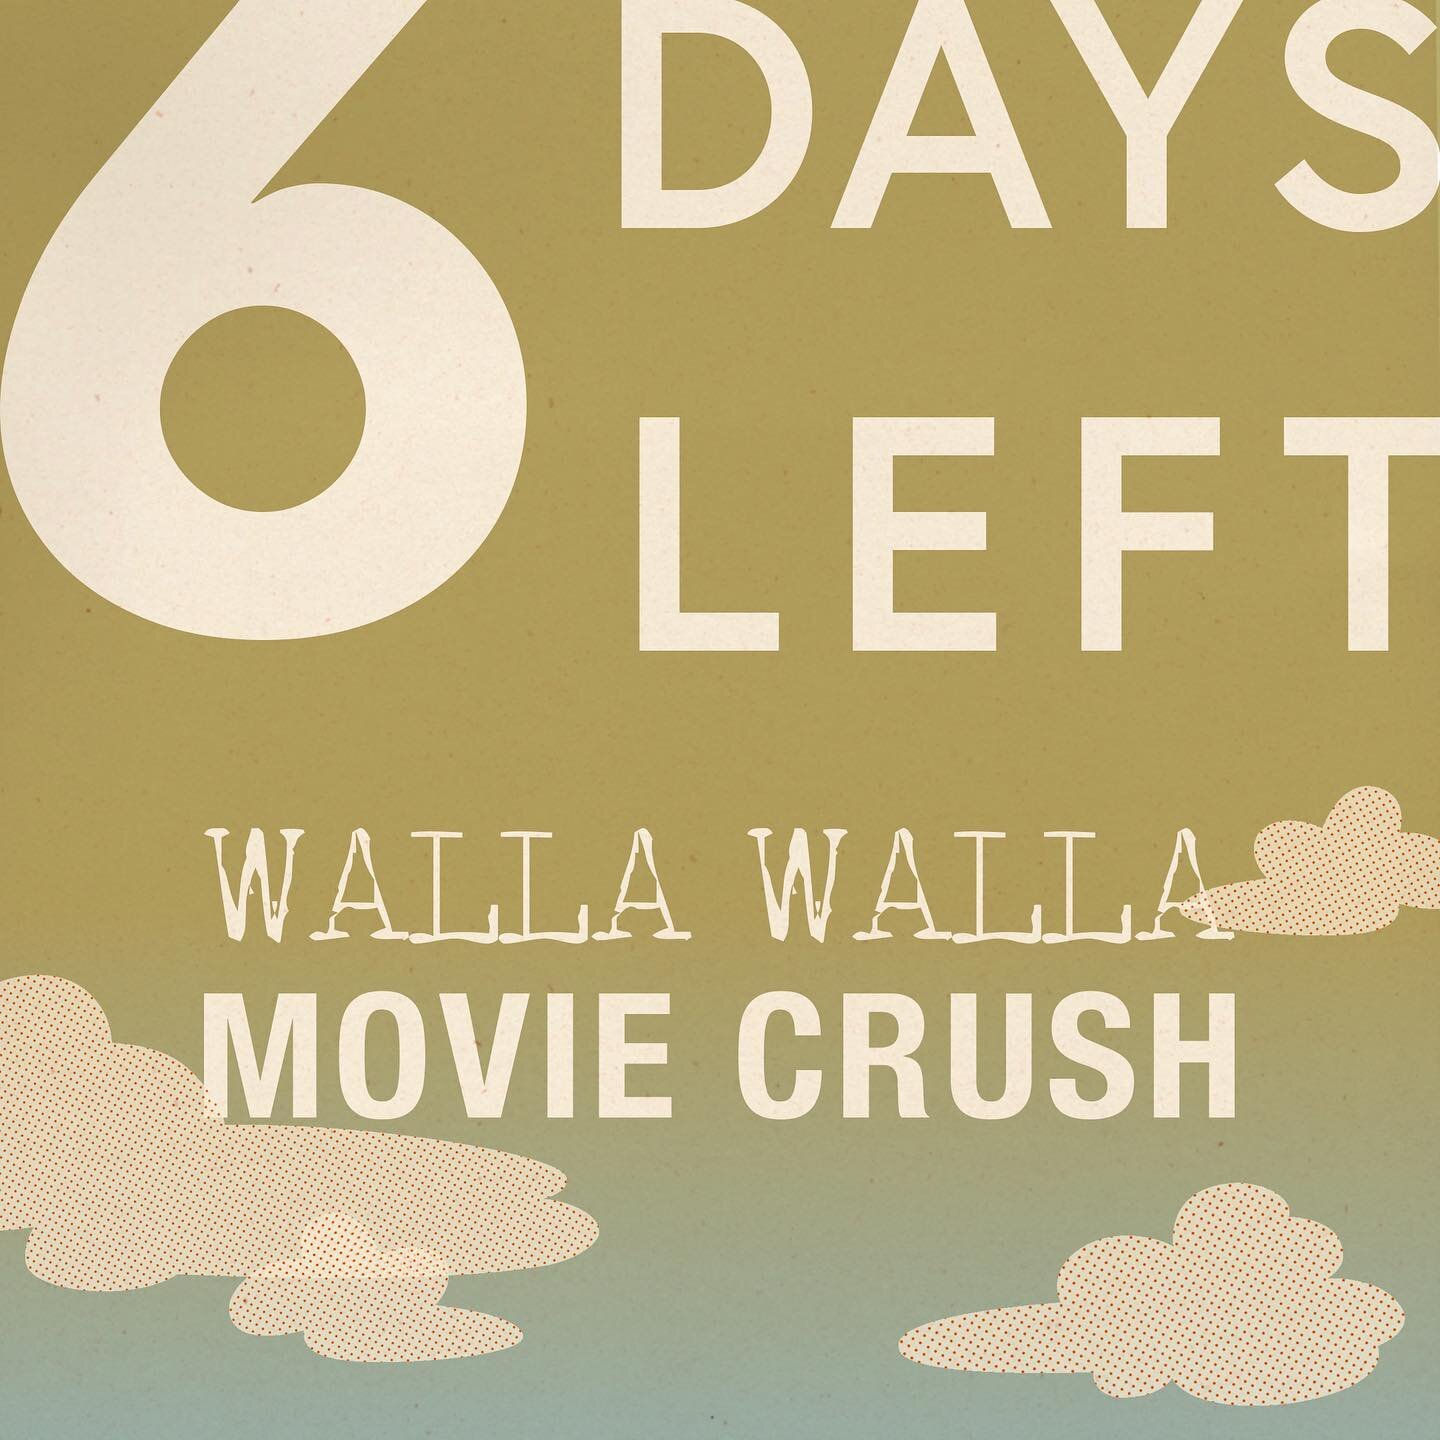 6 days until the Crush returns! What are you looking forward to the most? With our incredible programming, top-notch catering, and wonderful guests, there&rsquo;s something here for everyone at WWMC!

#CrushFam4eva #CrushingIt #wallawallahollaholla #